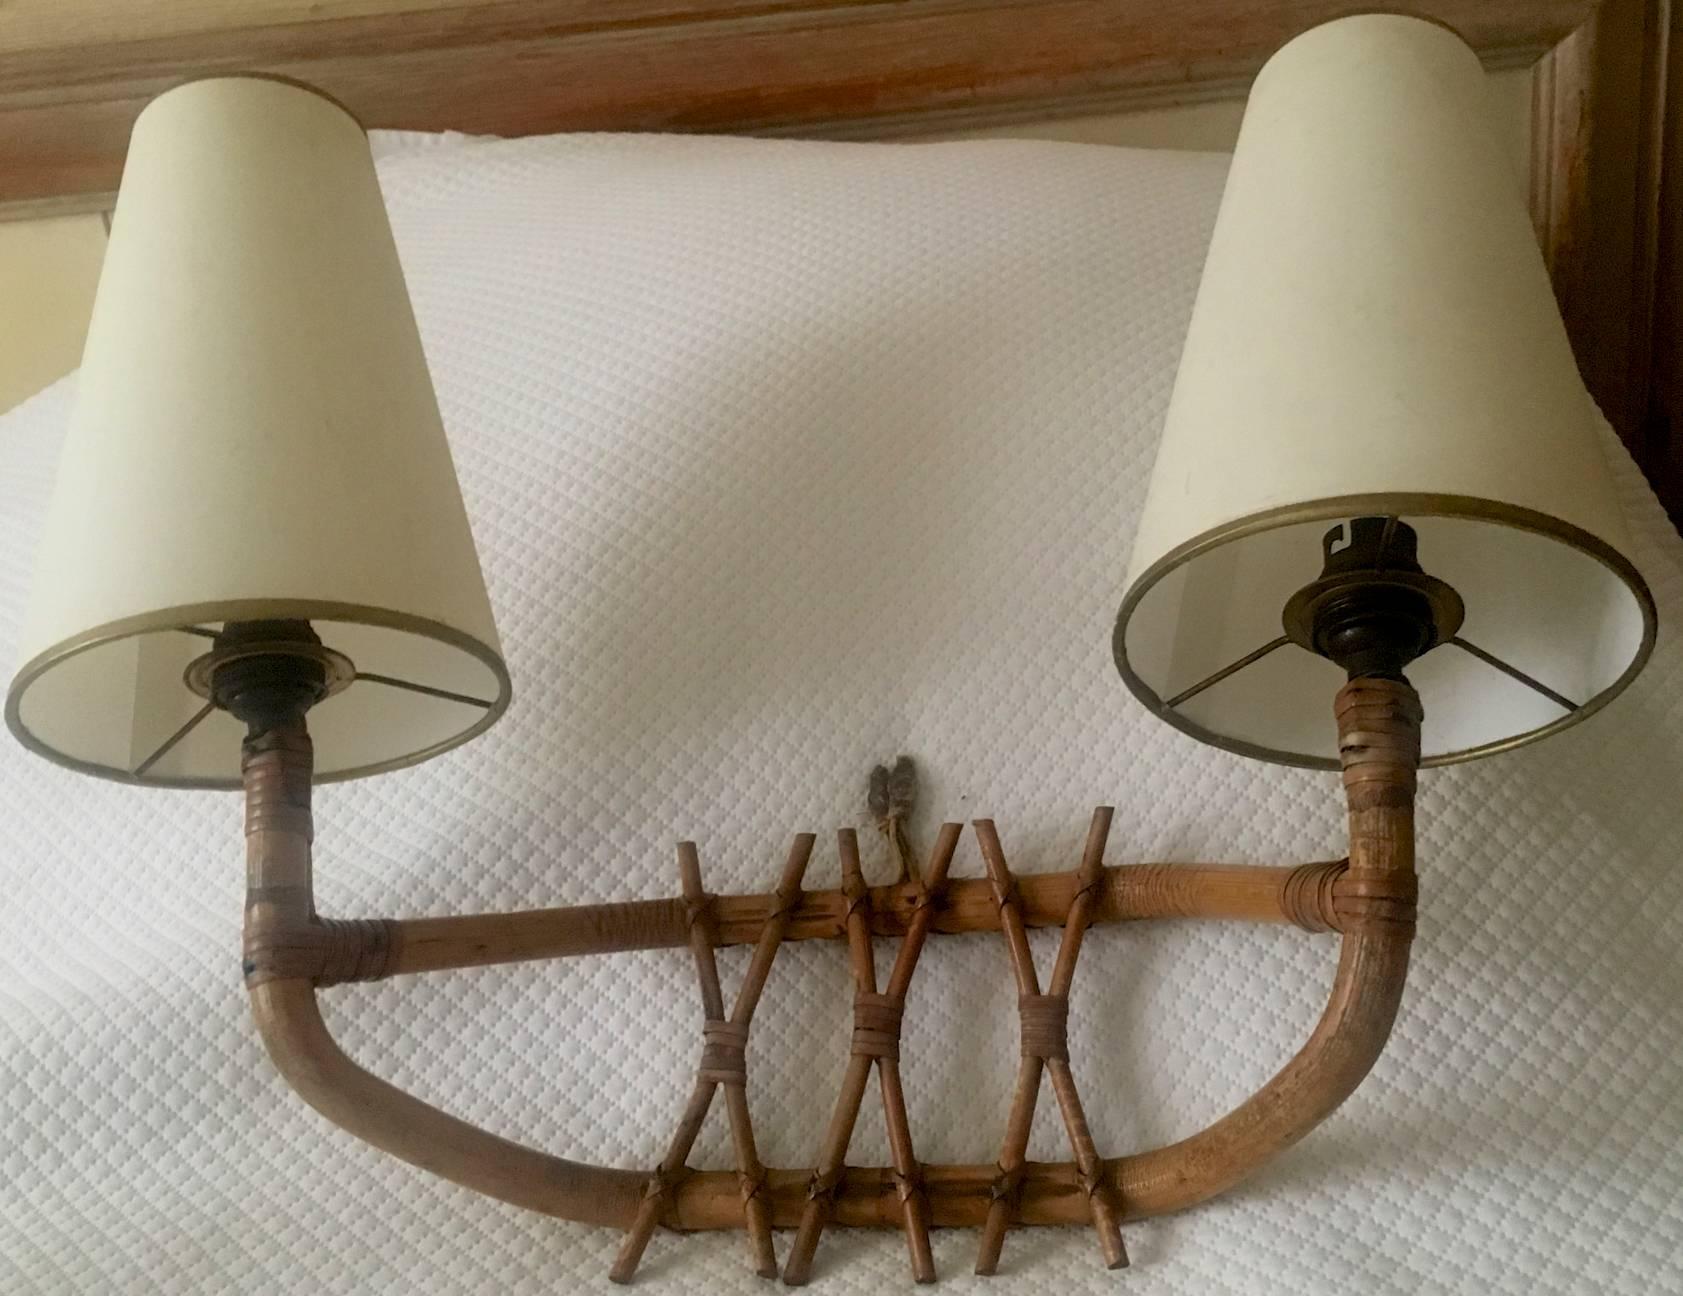 French Riviera charming two lights set of three bamboo sconces.